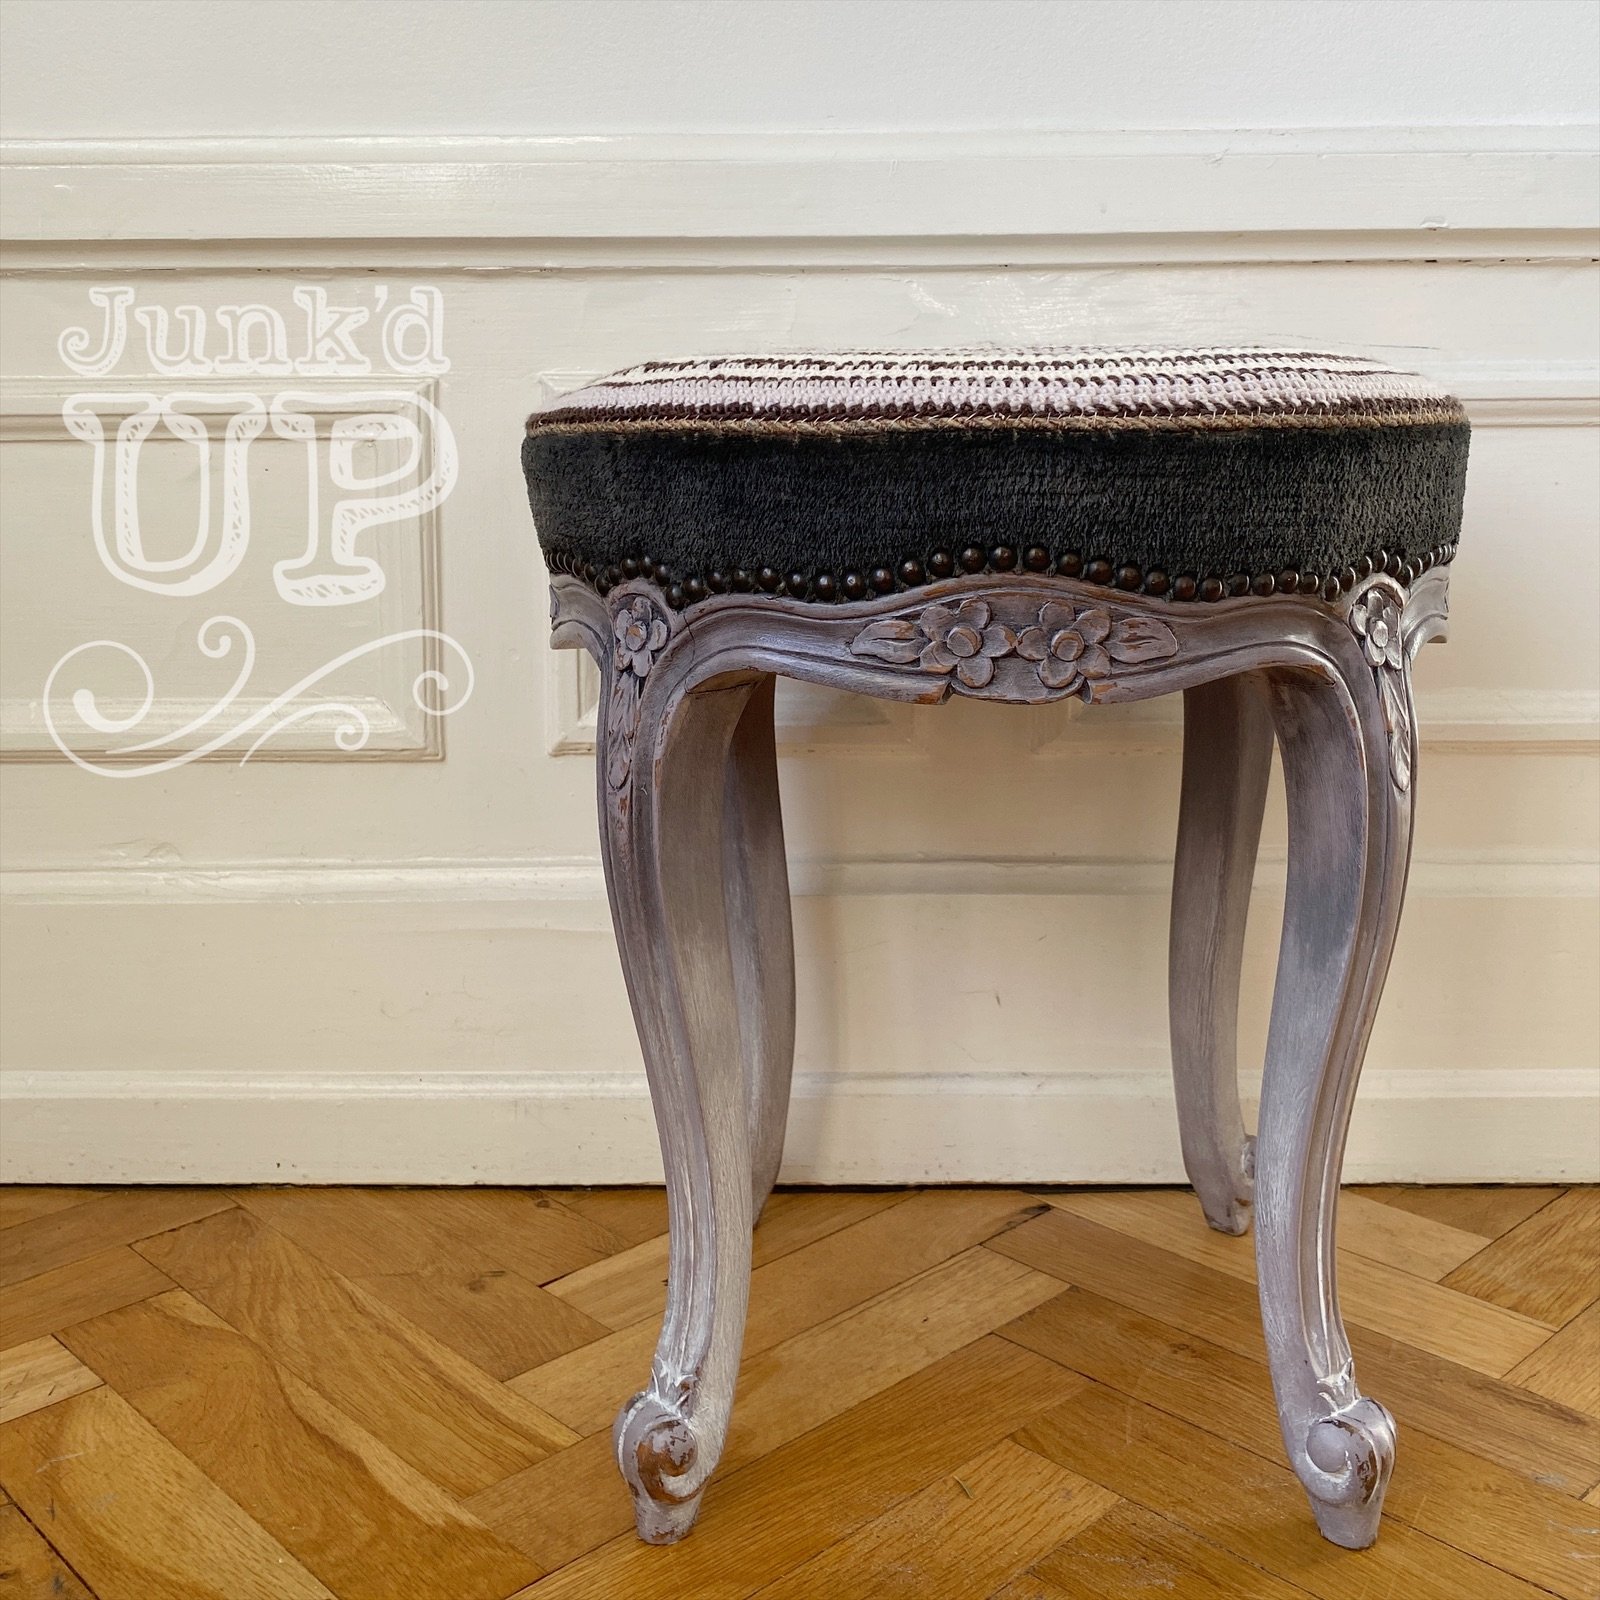 Upholstered Stool with Ombré Legs